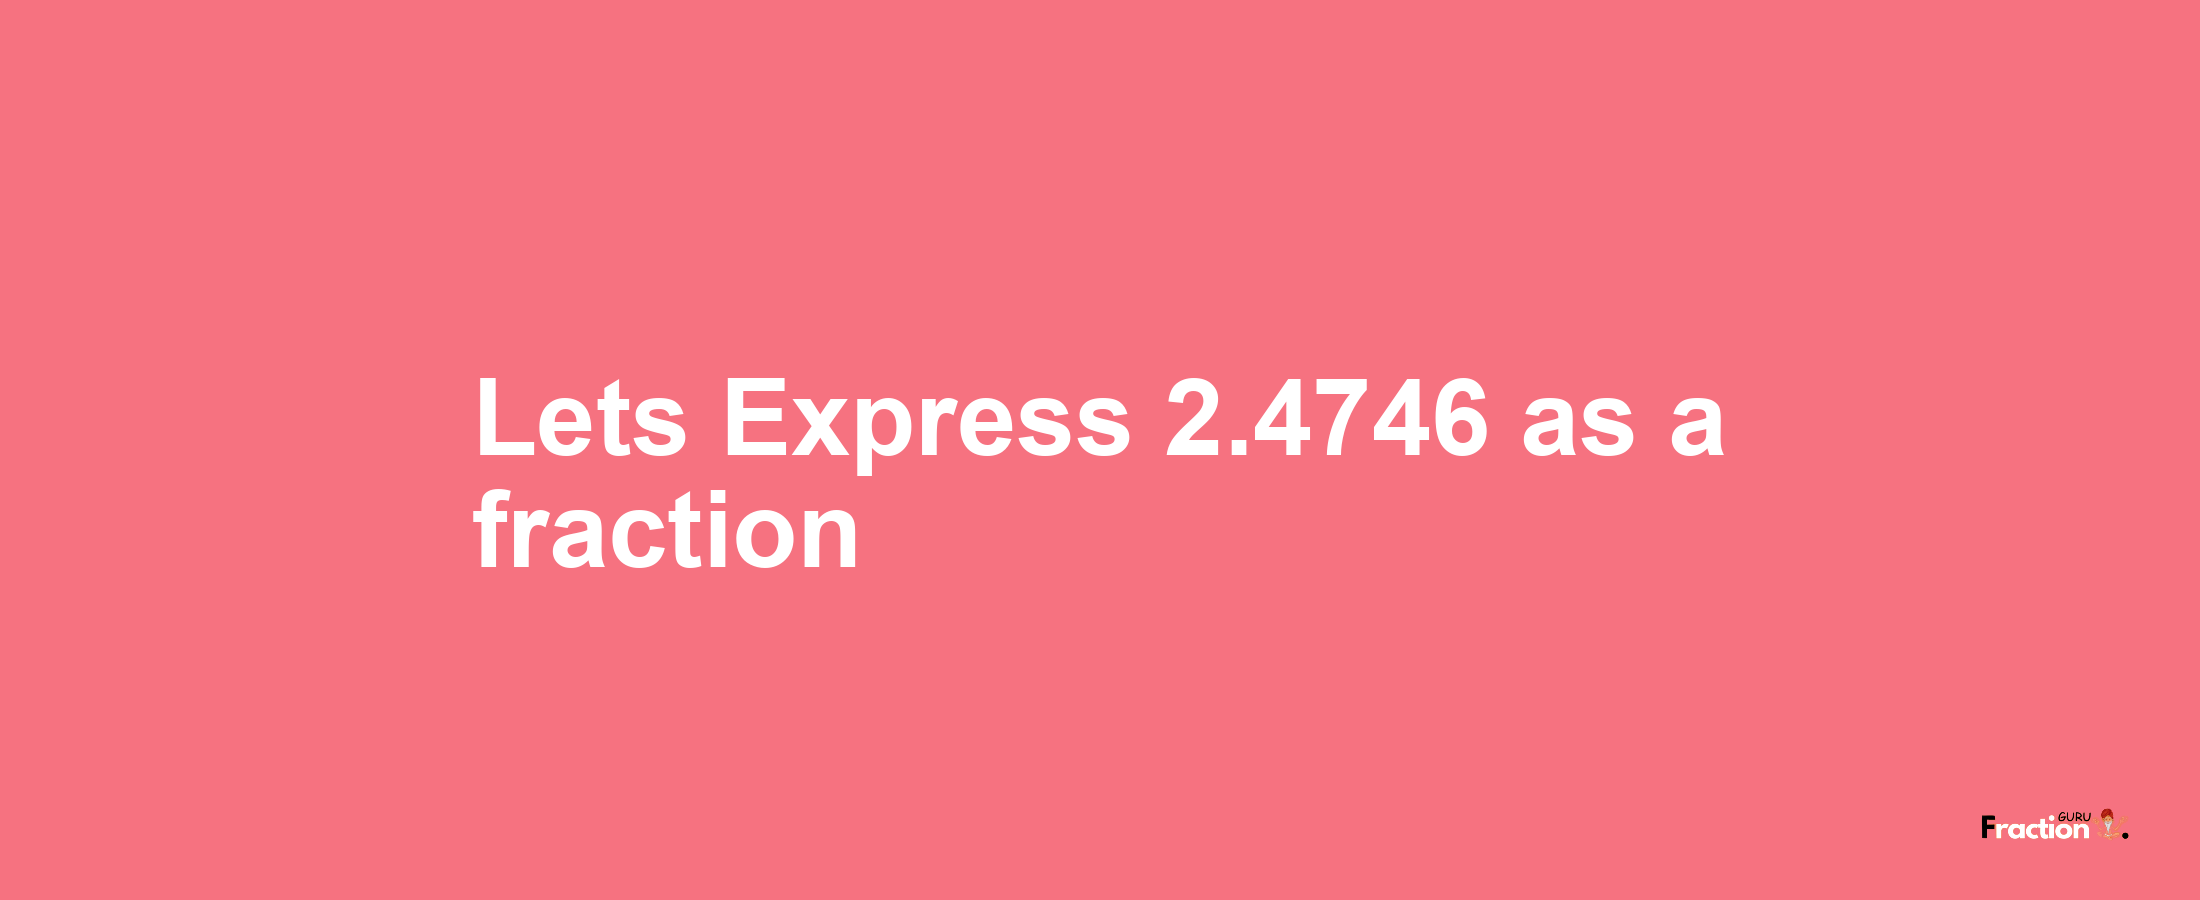 Lets Express 2.4746 as afraction